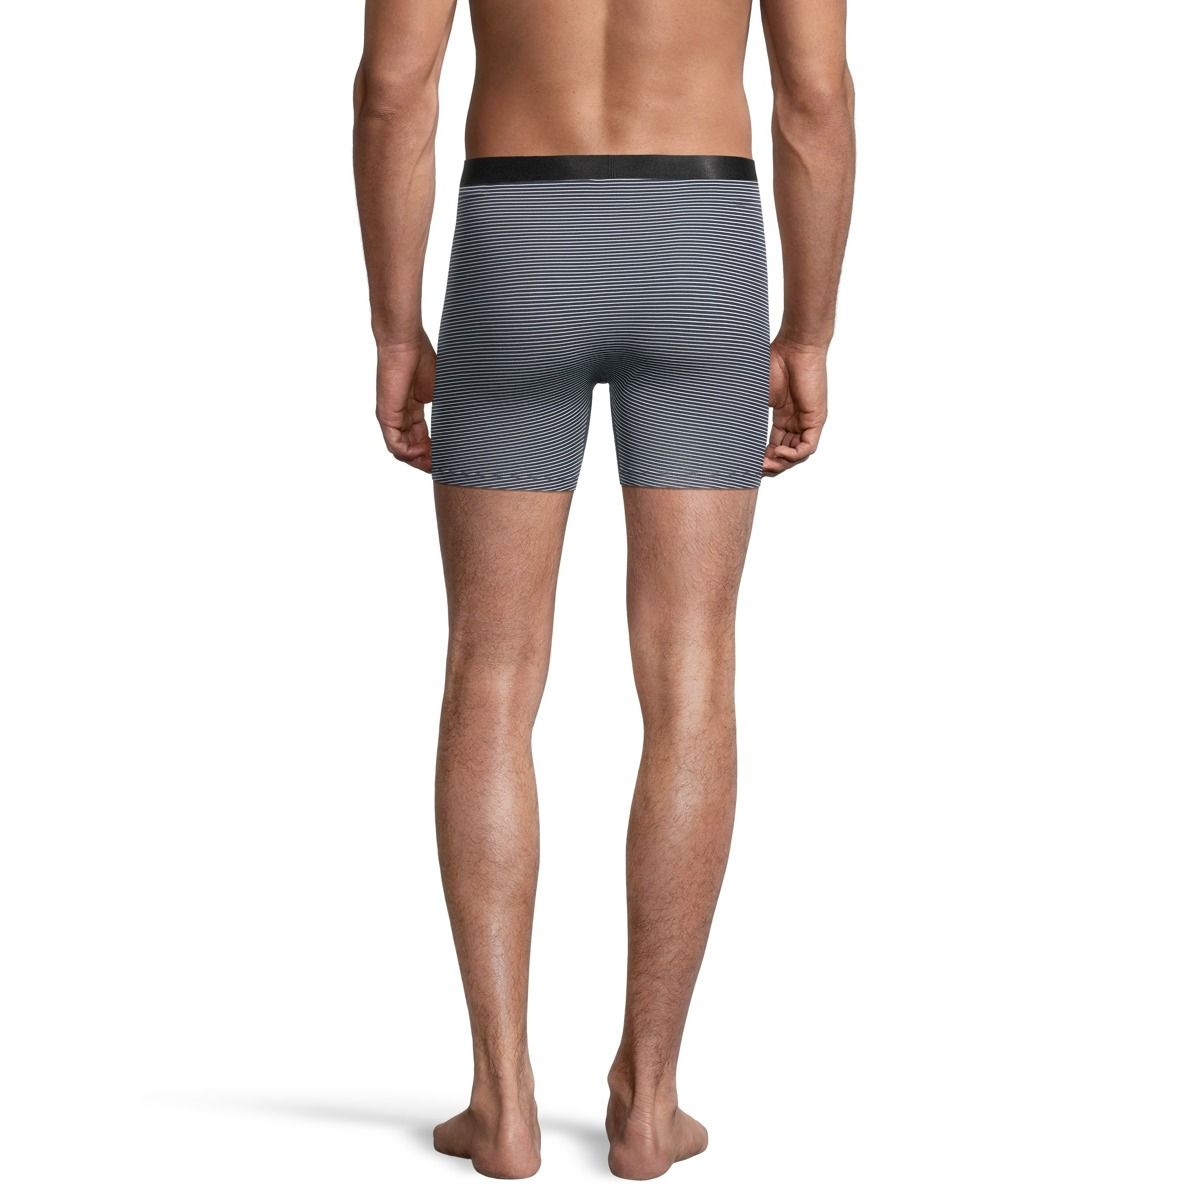 Hanes Men's Comfort Flex Waistband Boxer Brief Black/Grey 2pk (Size M) -  Delivered In As Fast As 15 Minutes